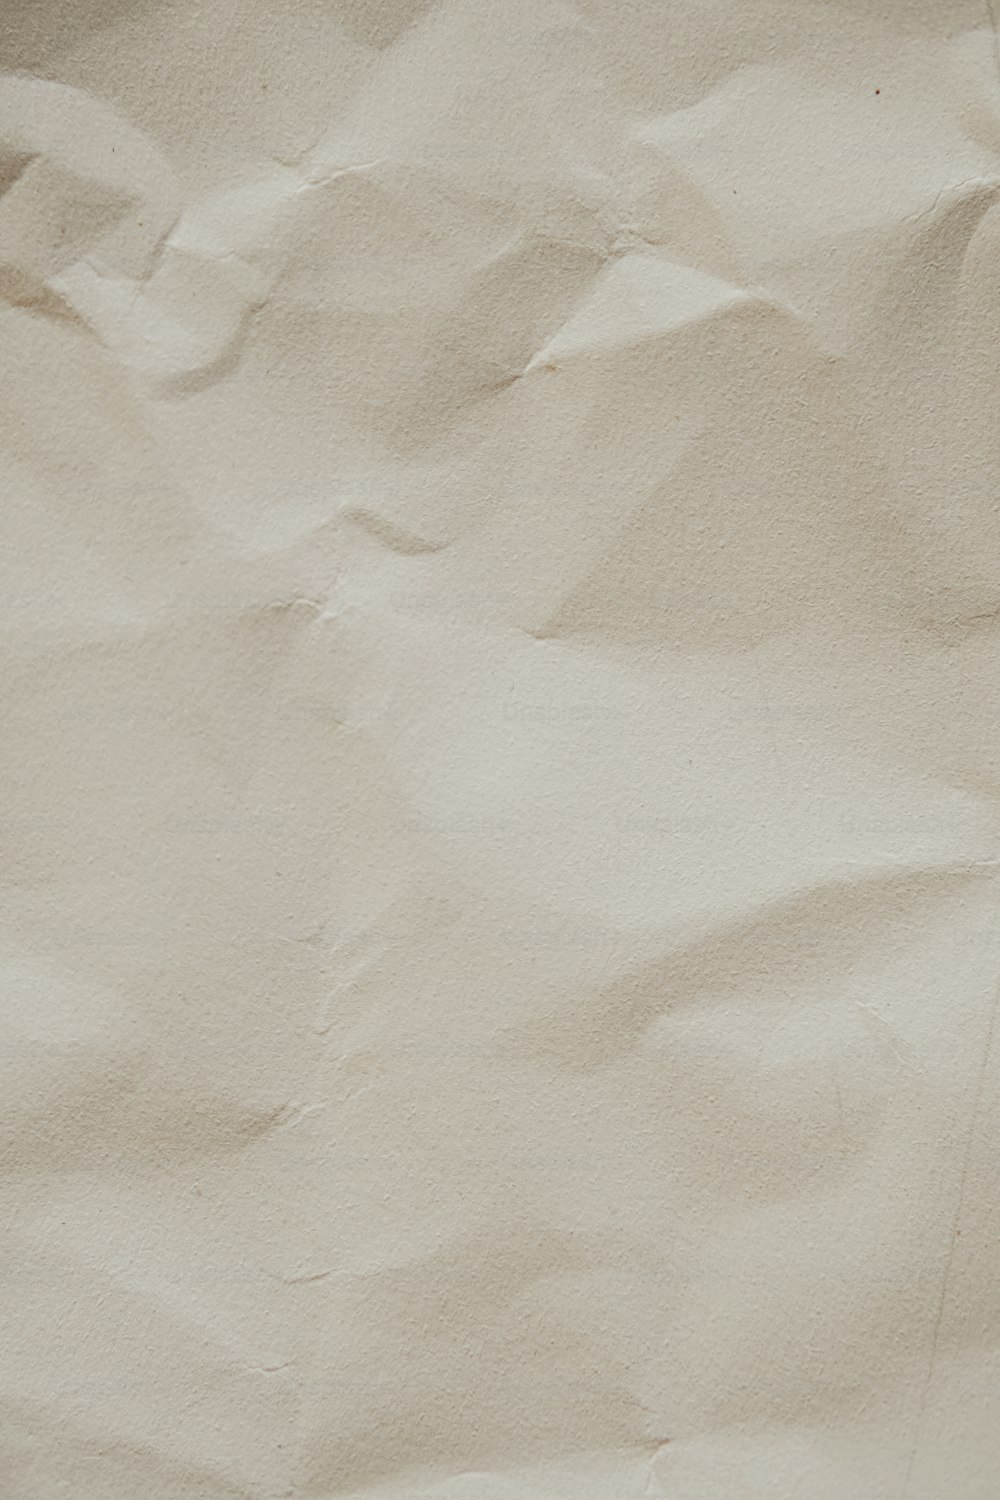 Antique Paper Background Stock Photo - Download Image Now